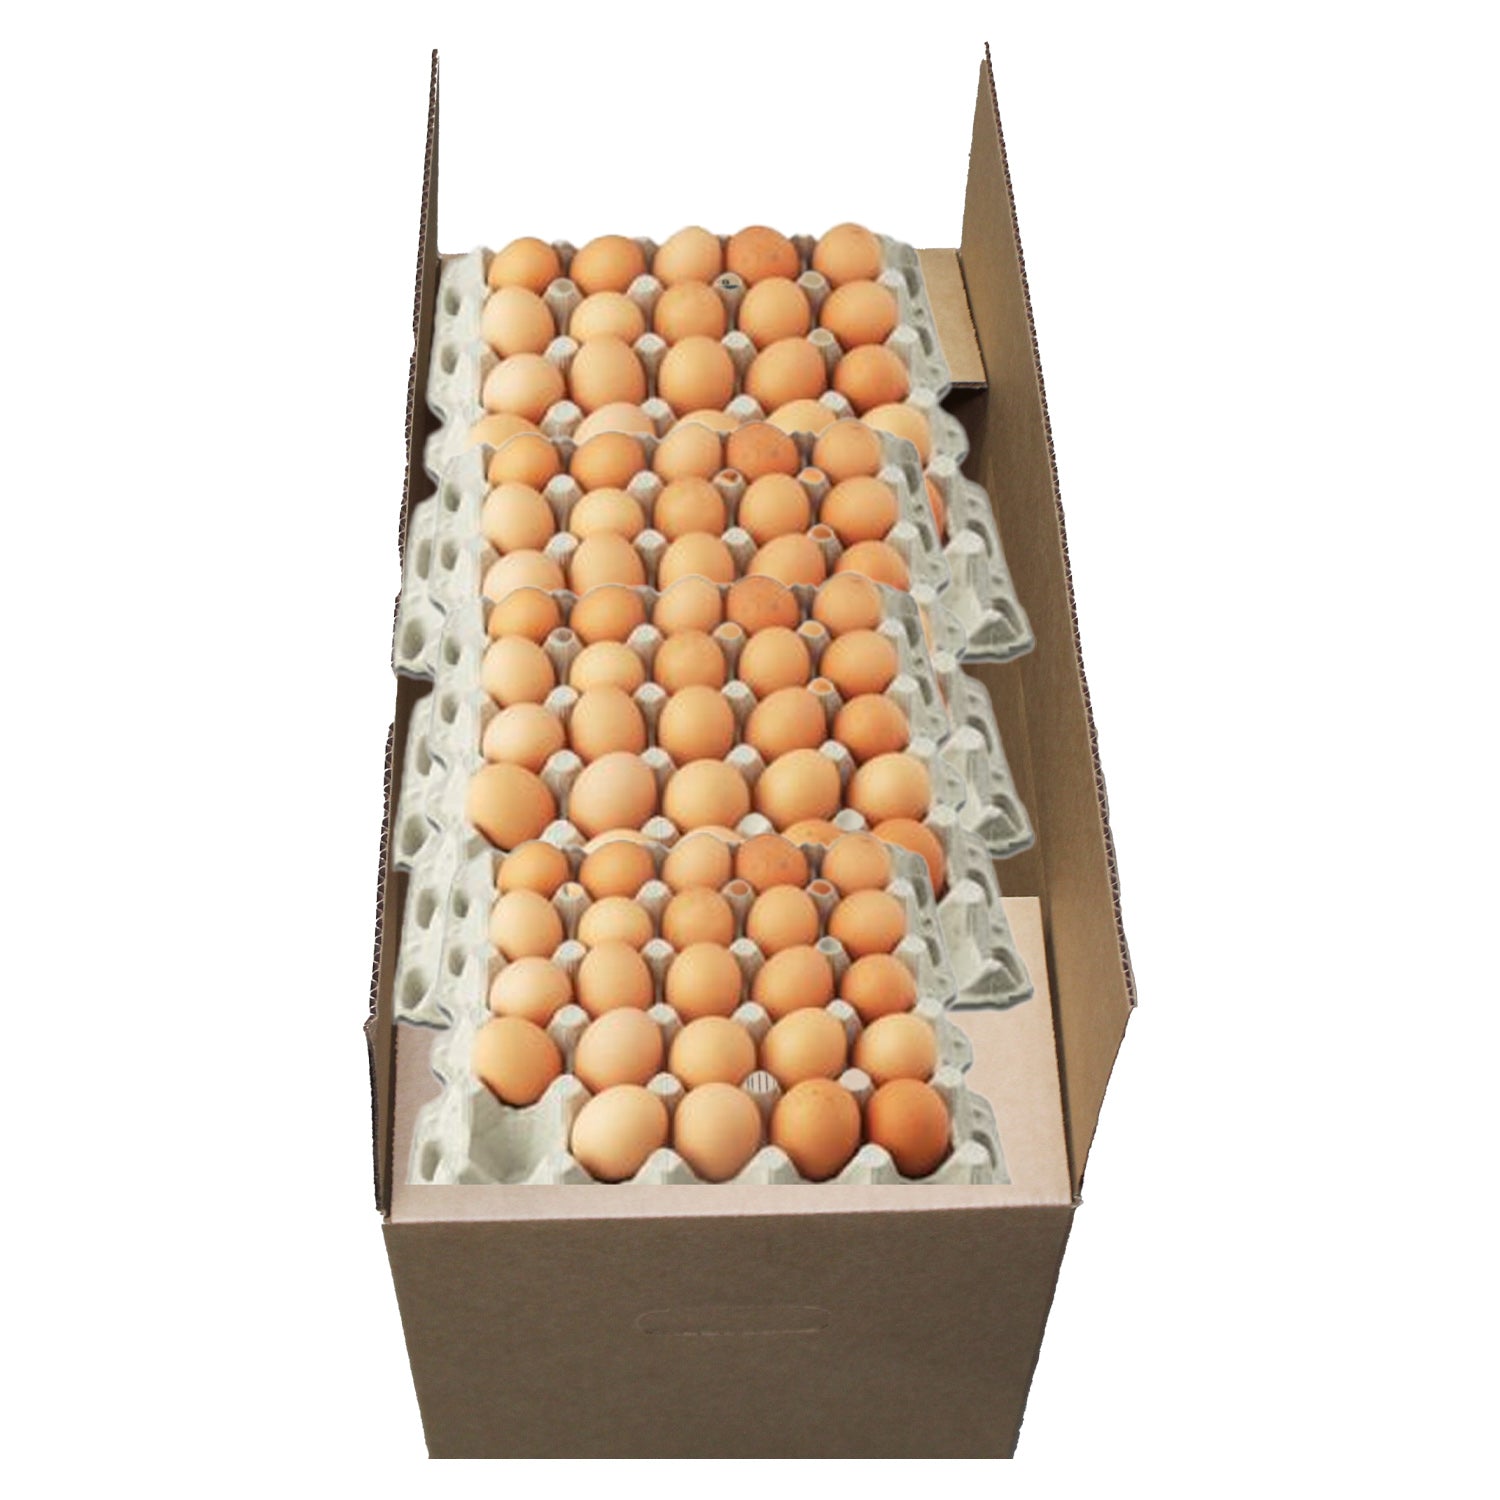 Corrugated Carboard Export Egg Boxes with Handles ECT32 Fits 30 Dozen Eggs